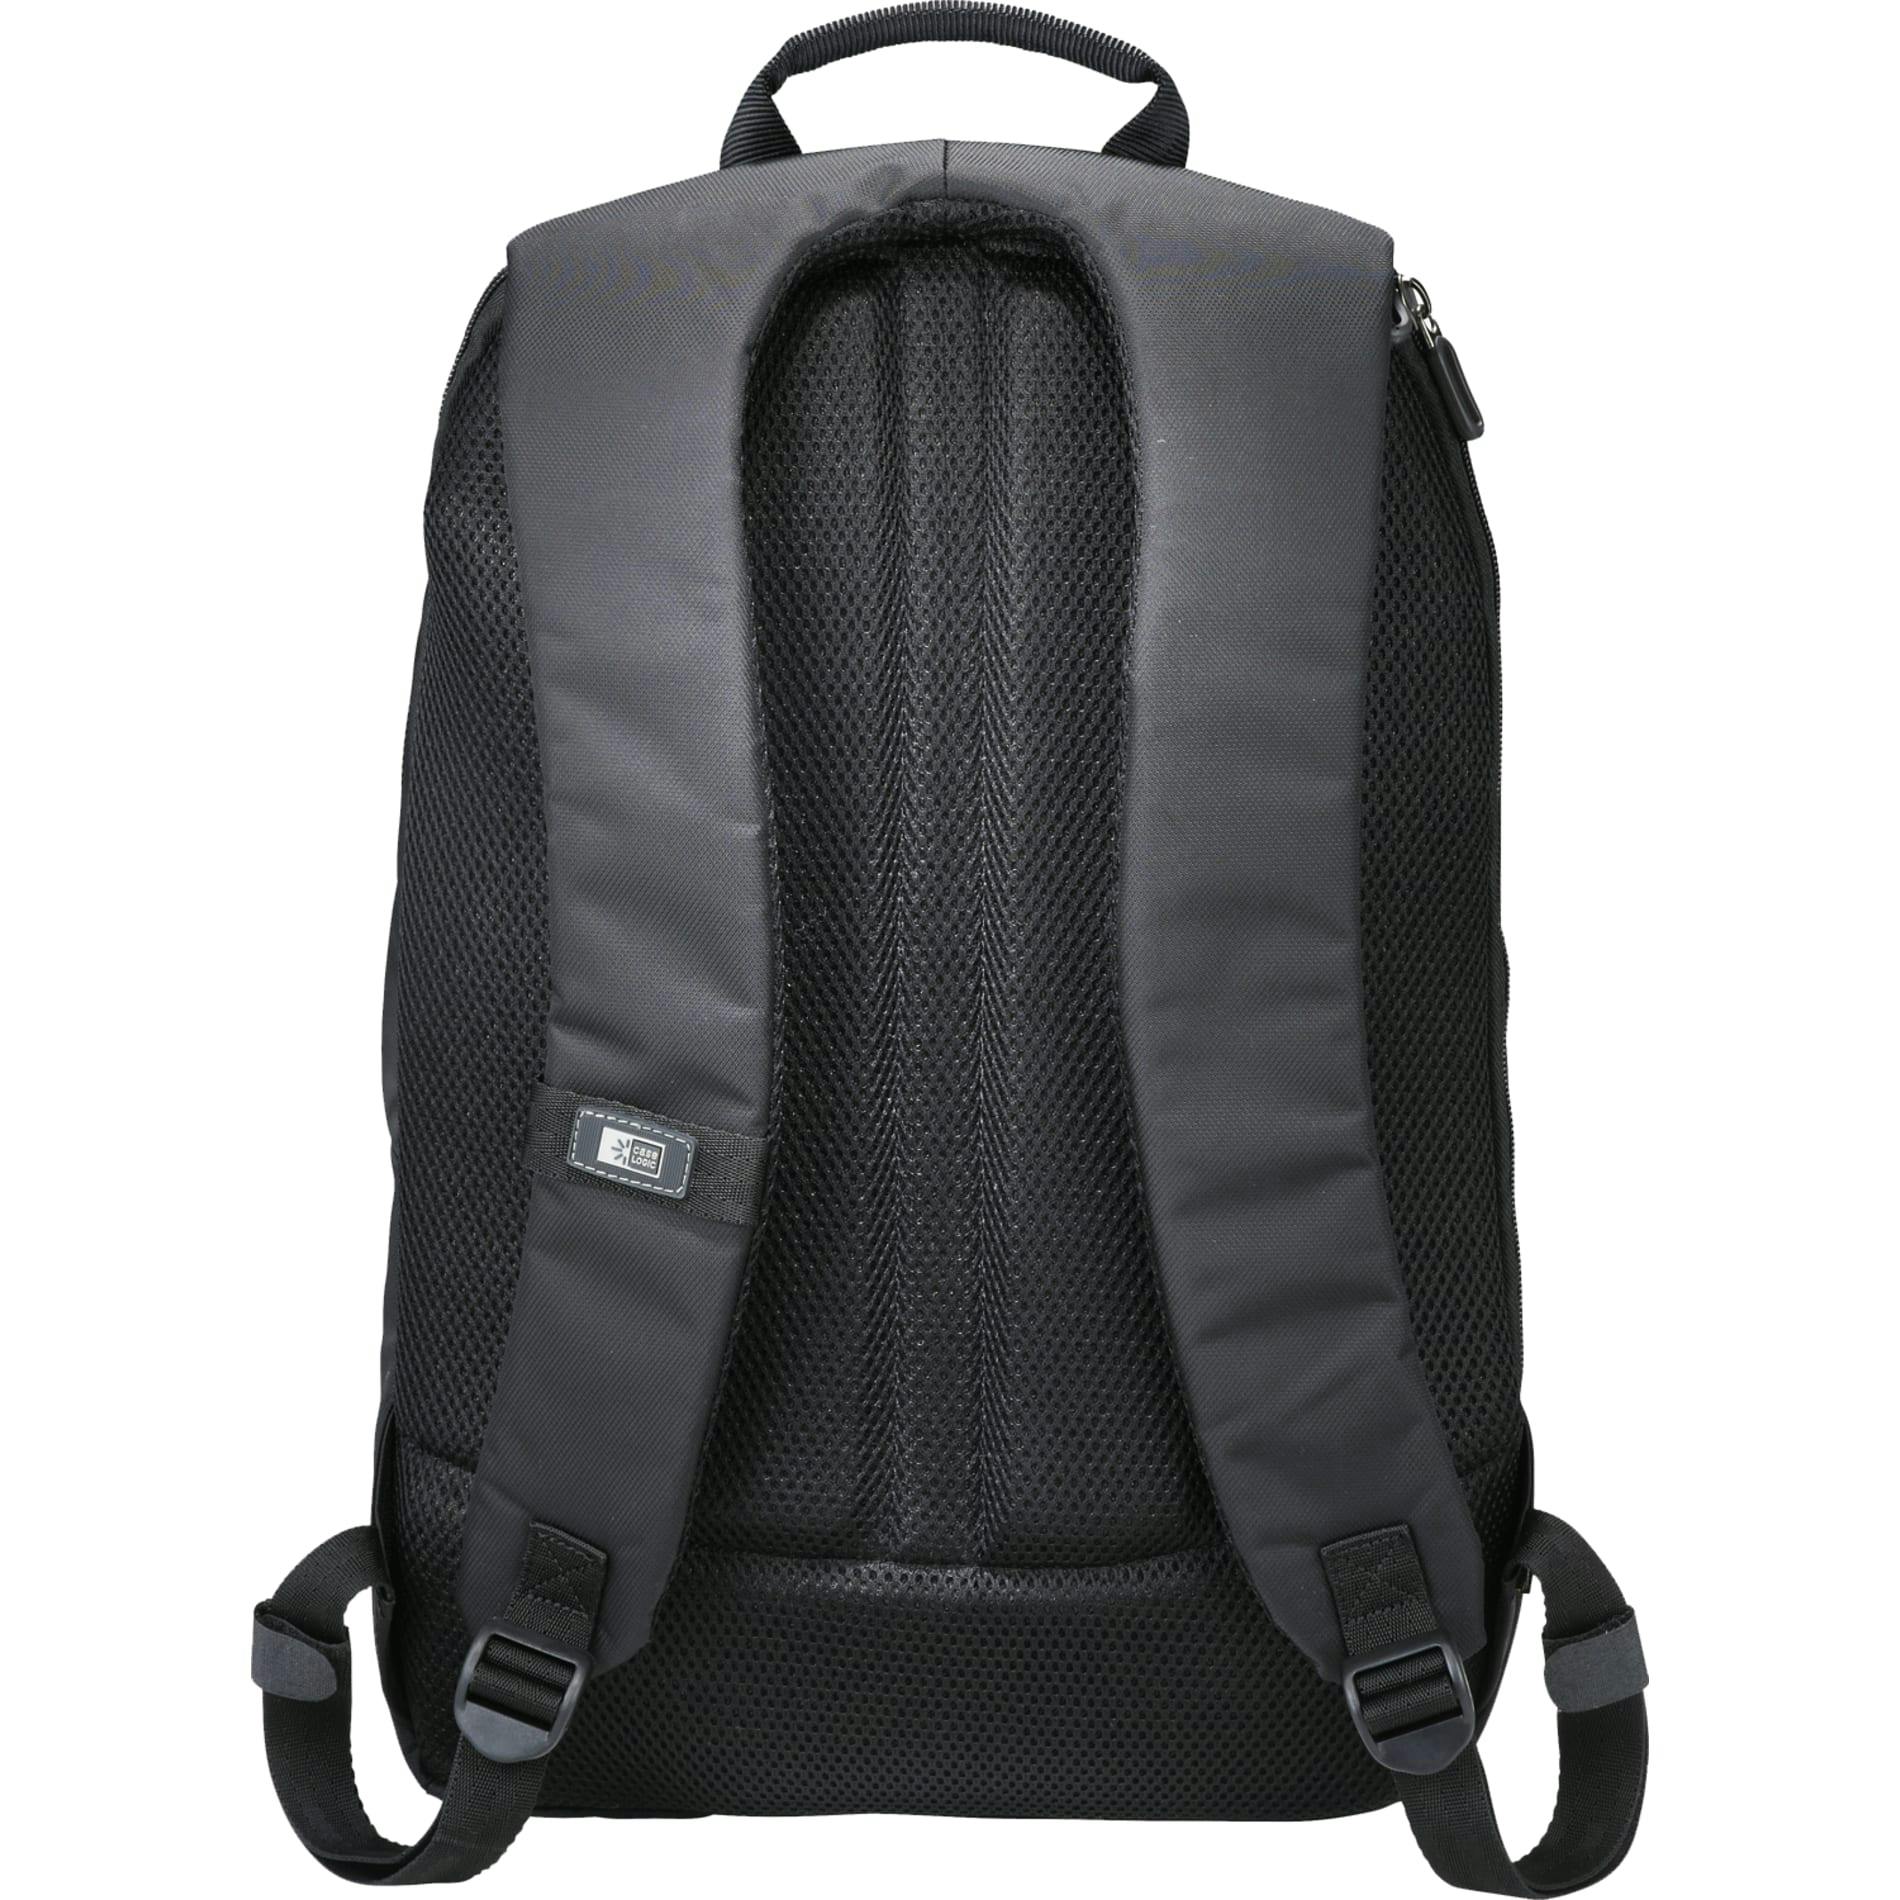 Case Logic 15" Computer and Tablet Backpack - additional Image 1